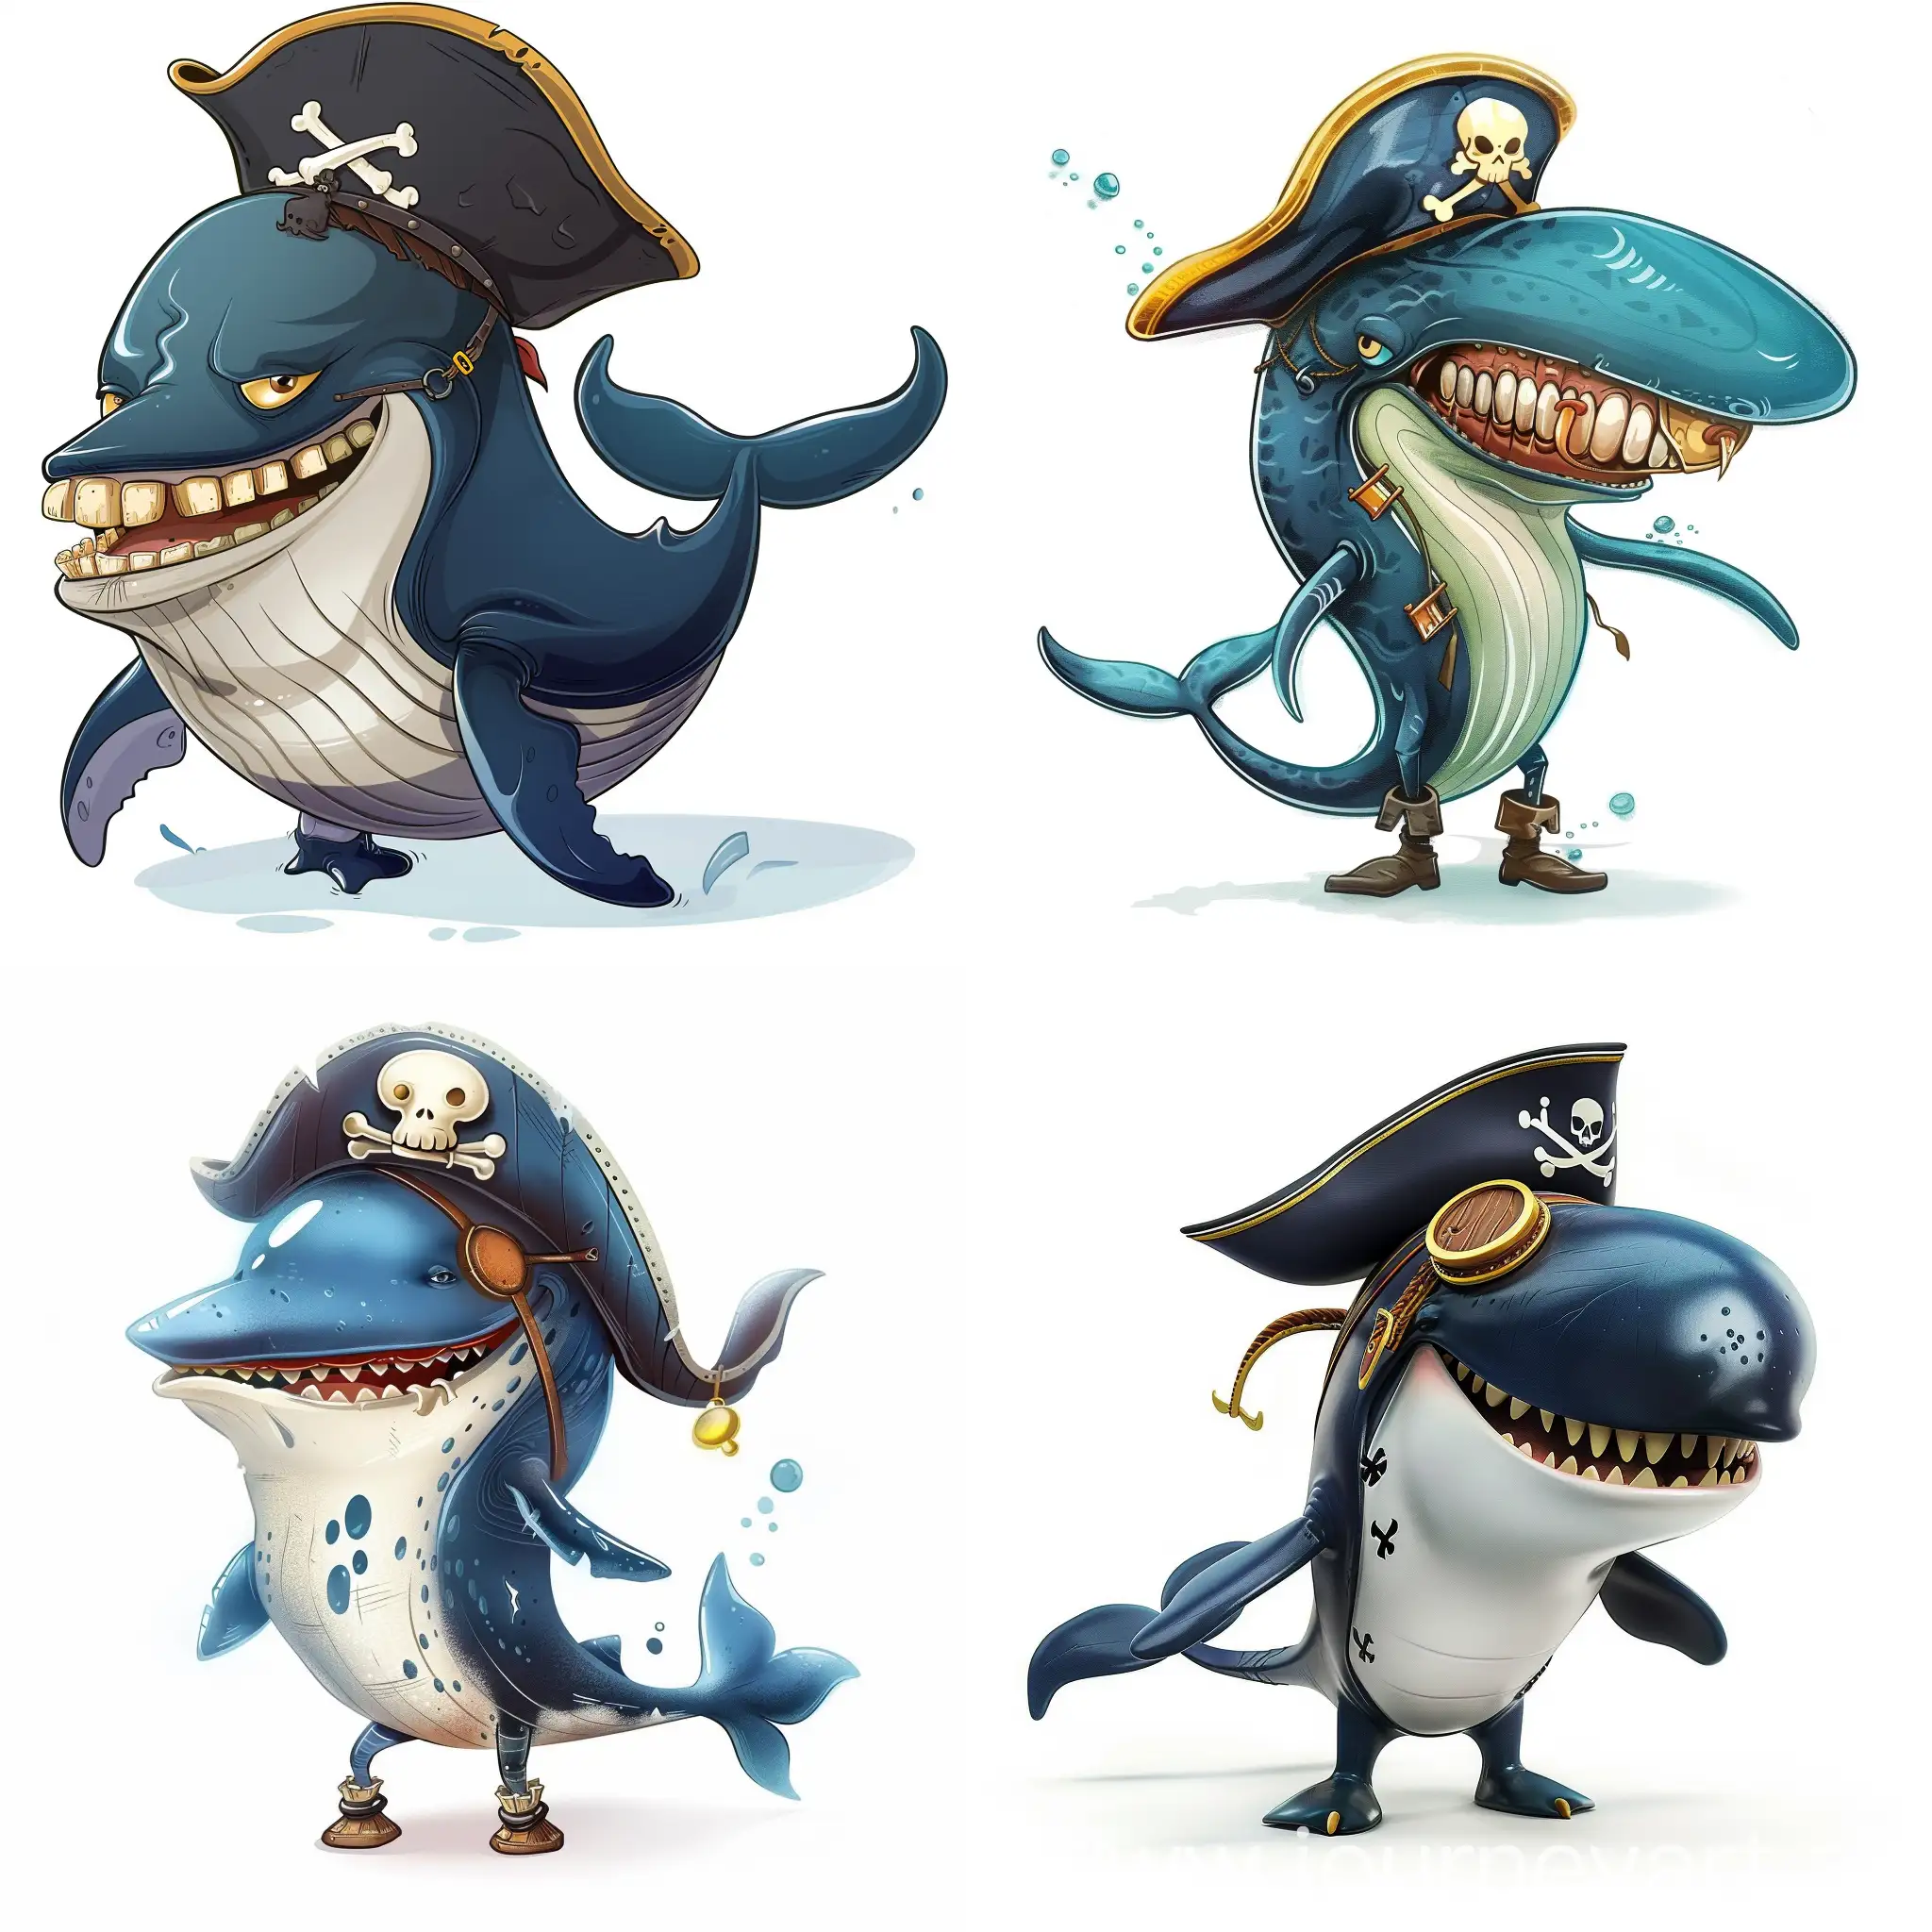 human like cartoon whale avatar on white background, standing on legs with pirate hat, pirate eye patch, smiling with one gold tooth and wooden prosthesis